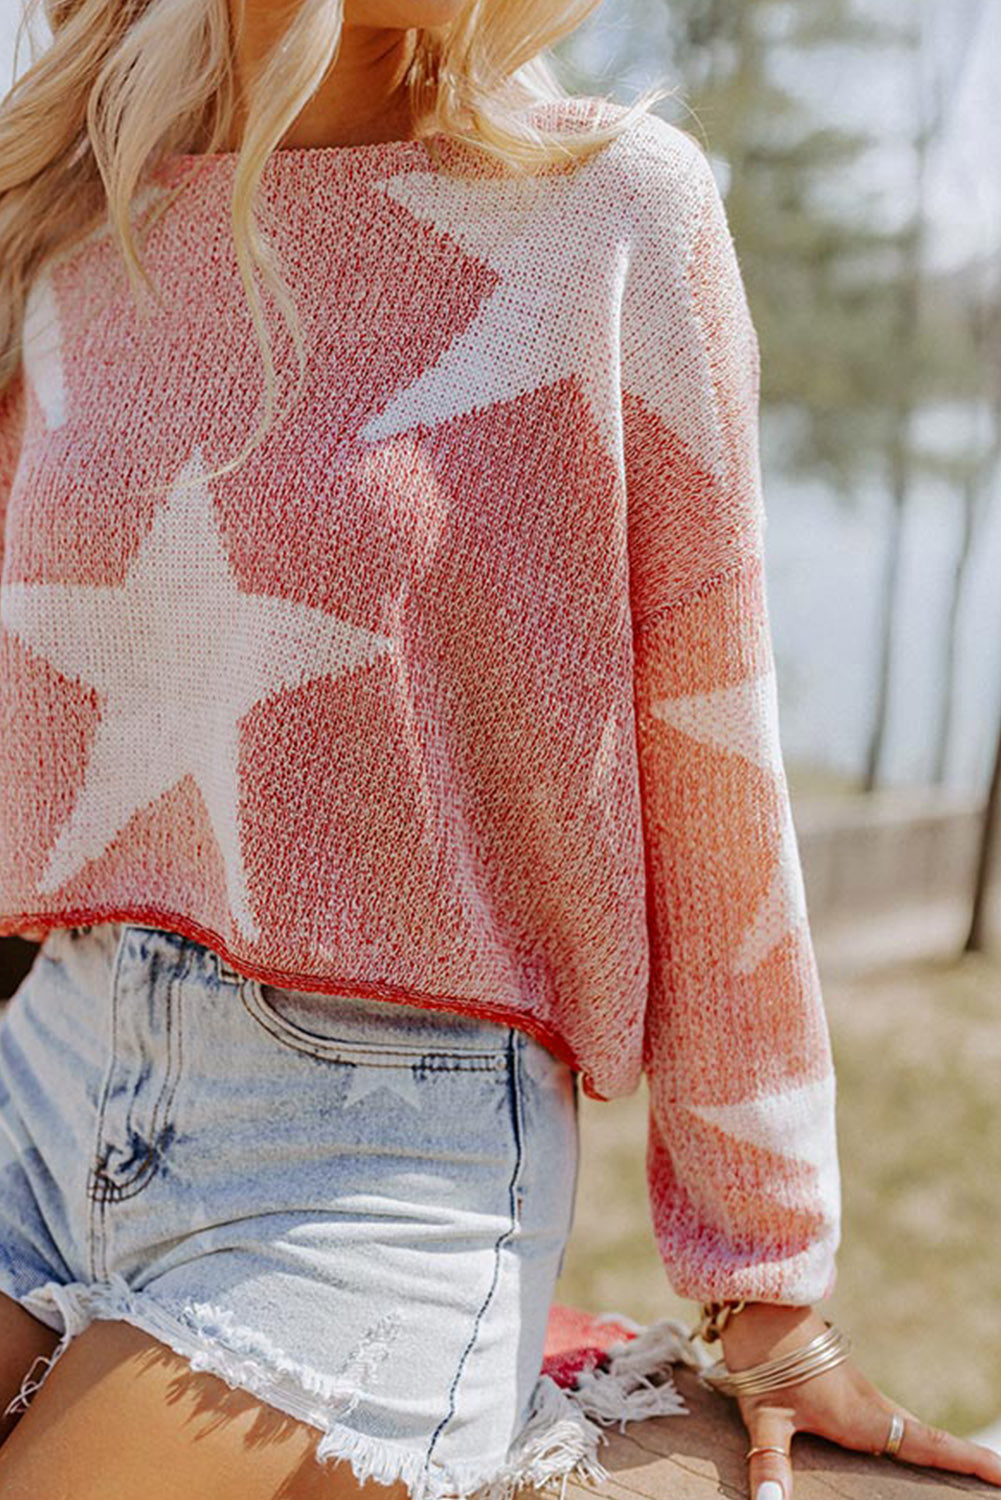 LC2723061-3-S, LC2723061-3-M, LC2723061-3-L, LC2723061-3-XL, Red Big Star Spangled Casual Knit Sweater